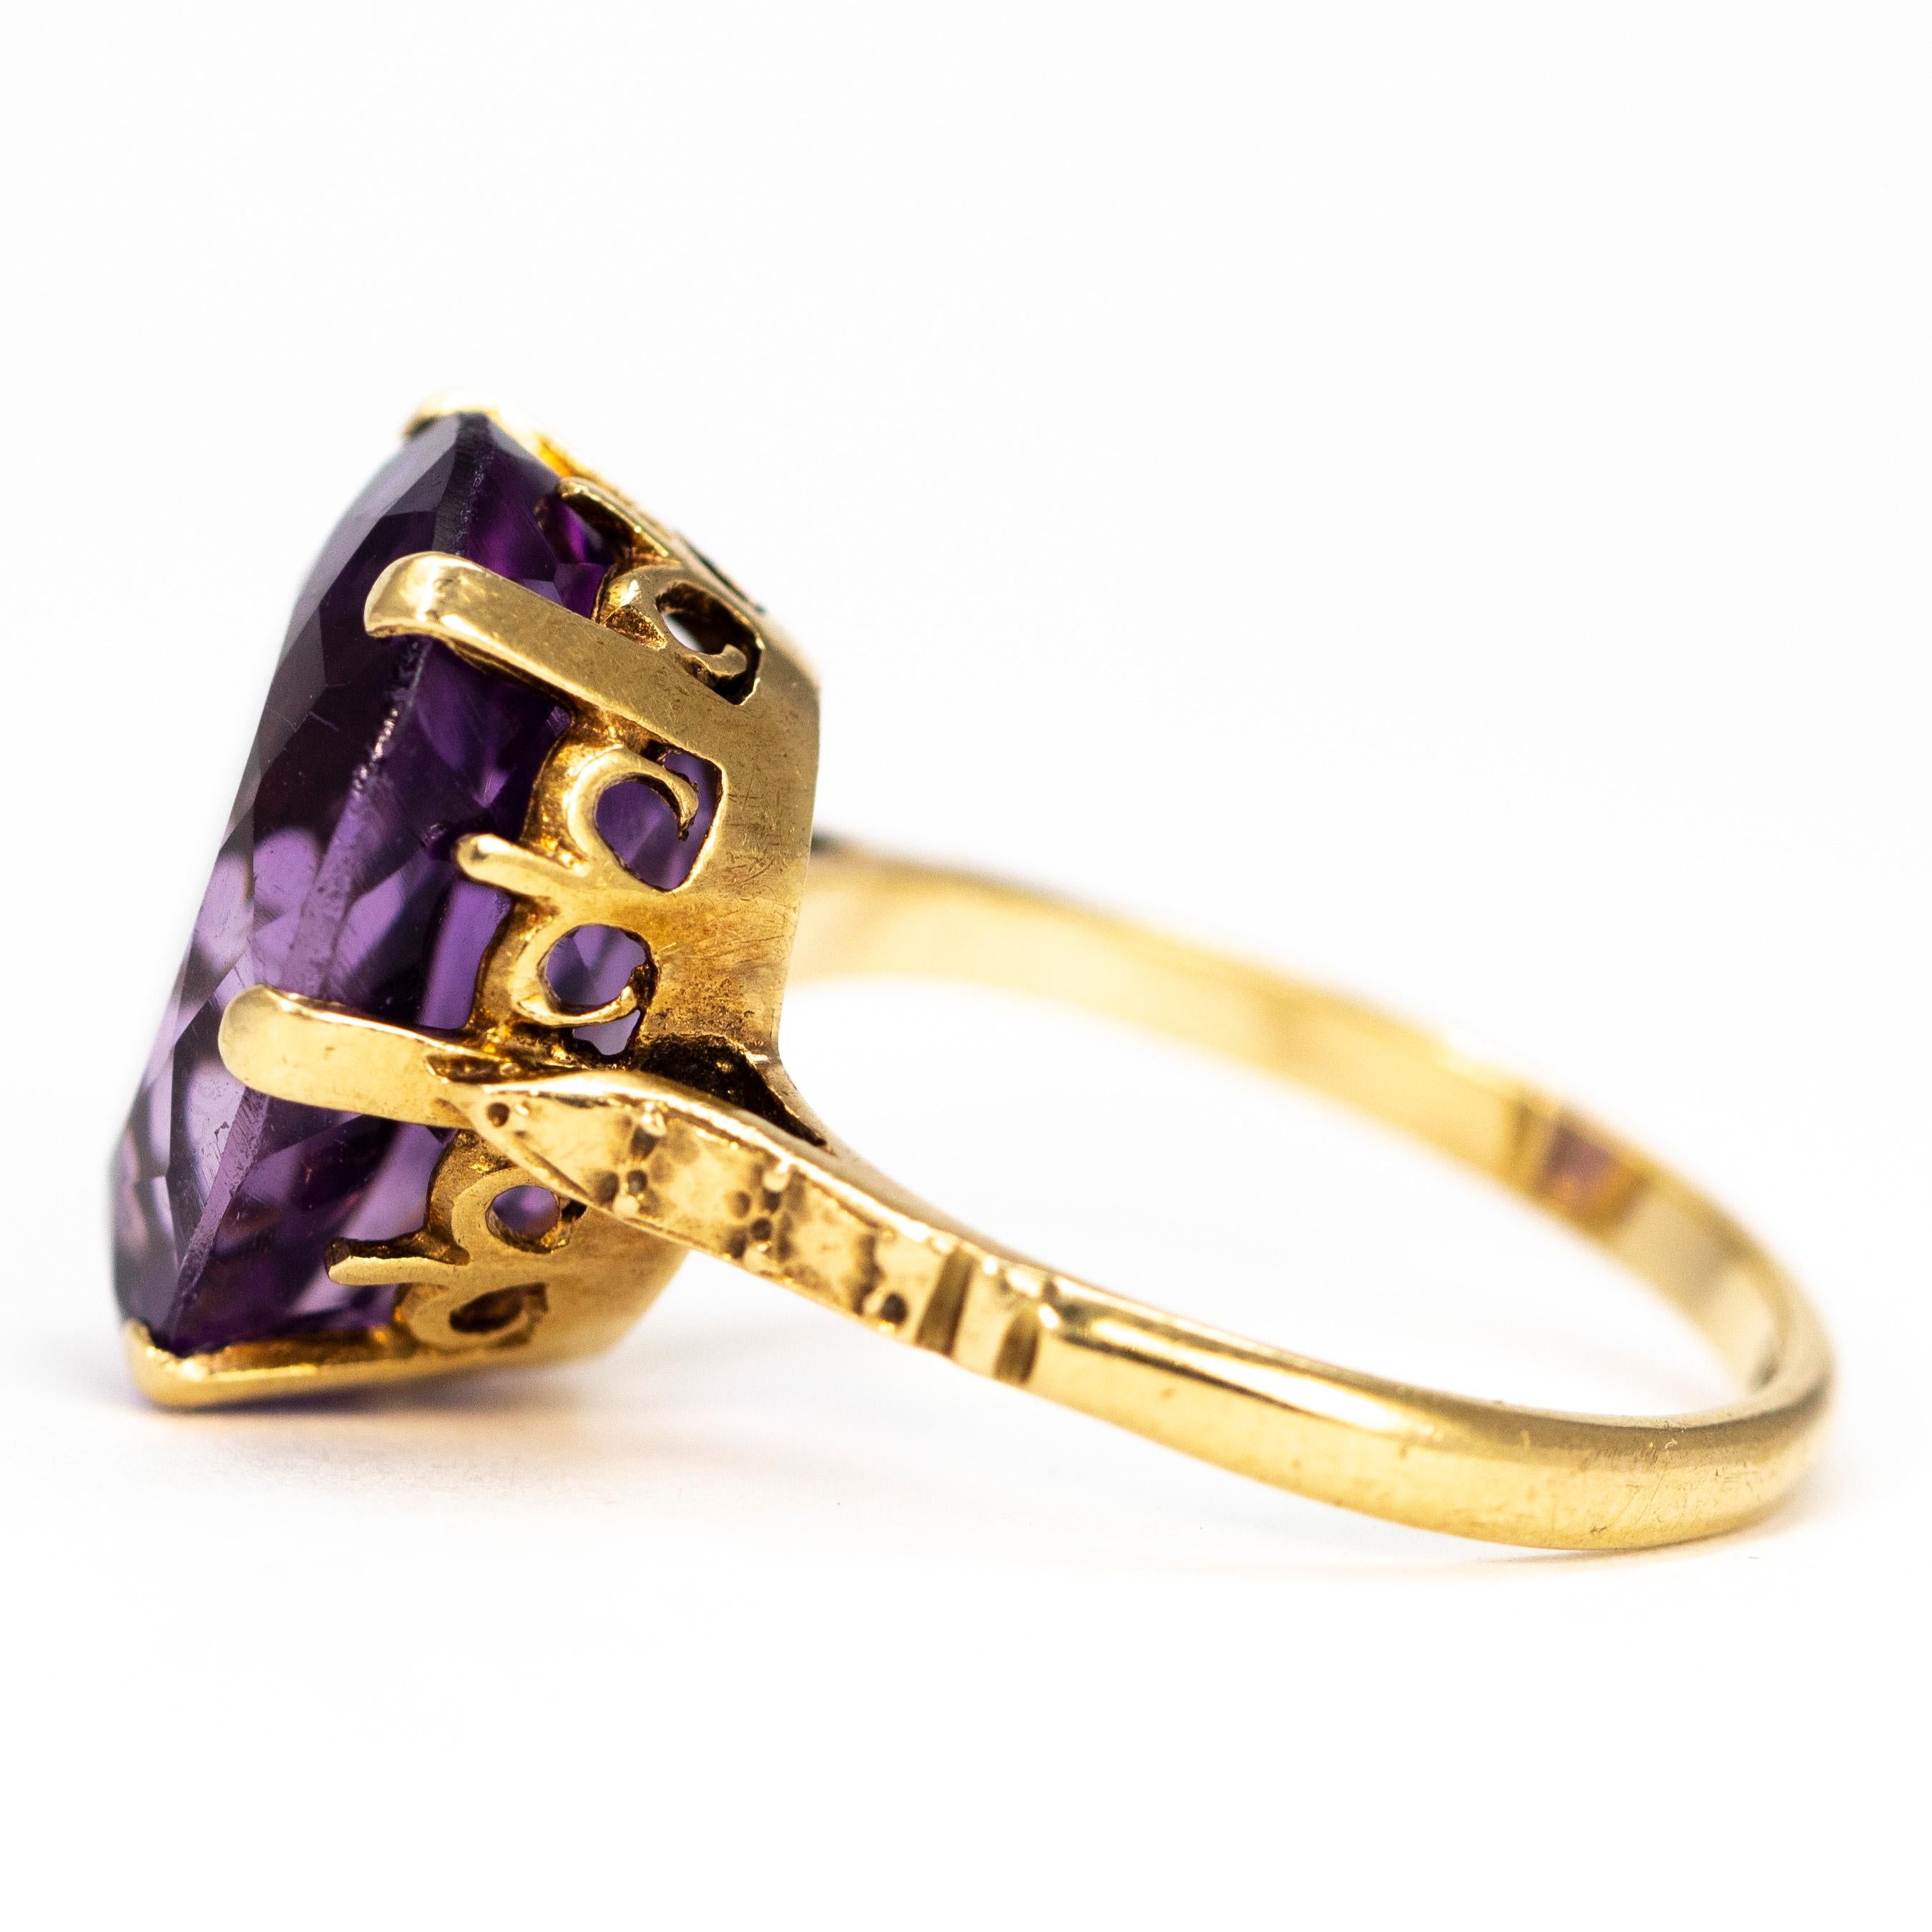 Edwardian Antique Amethyst and 9 Carat Gold Cocktail Ring